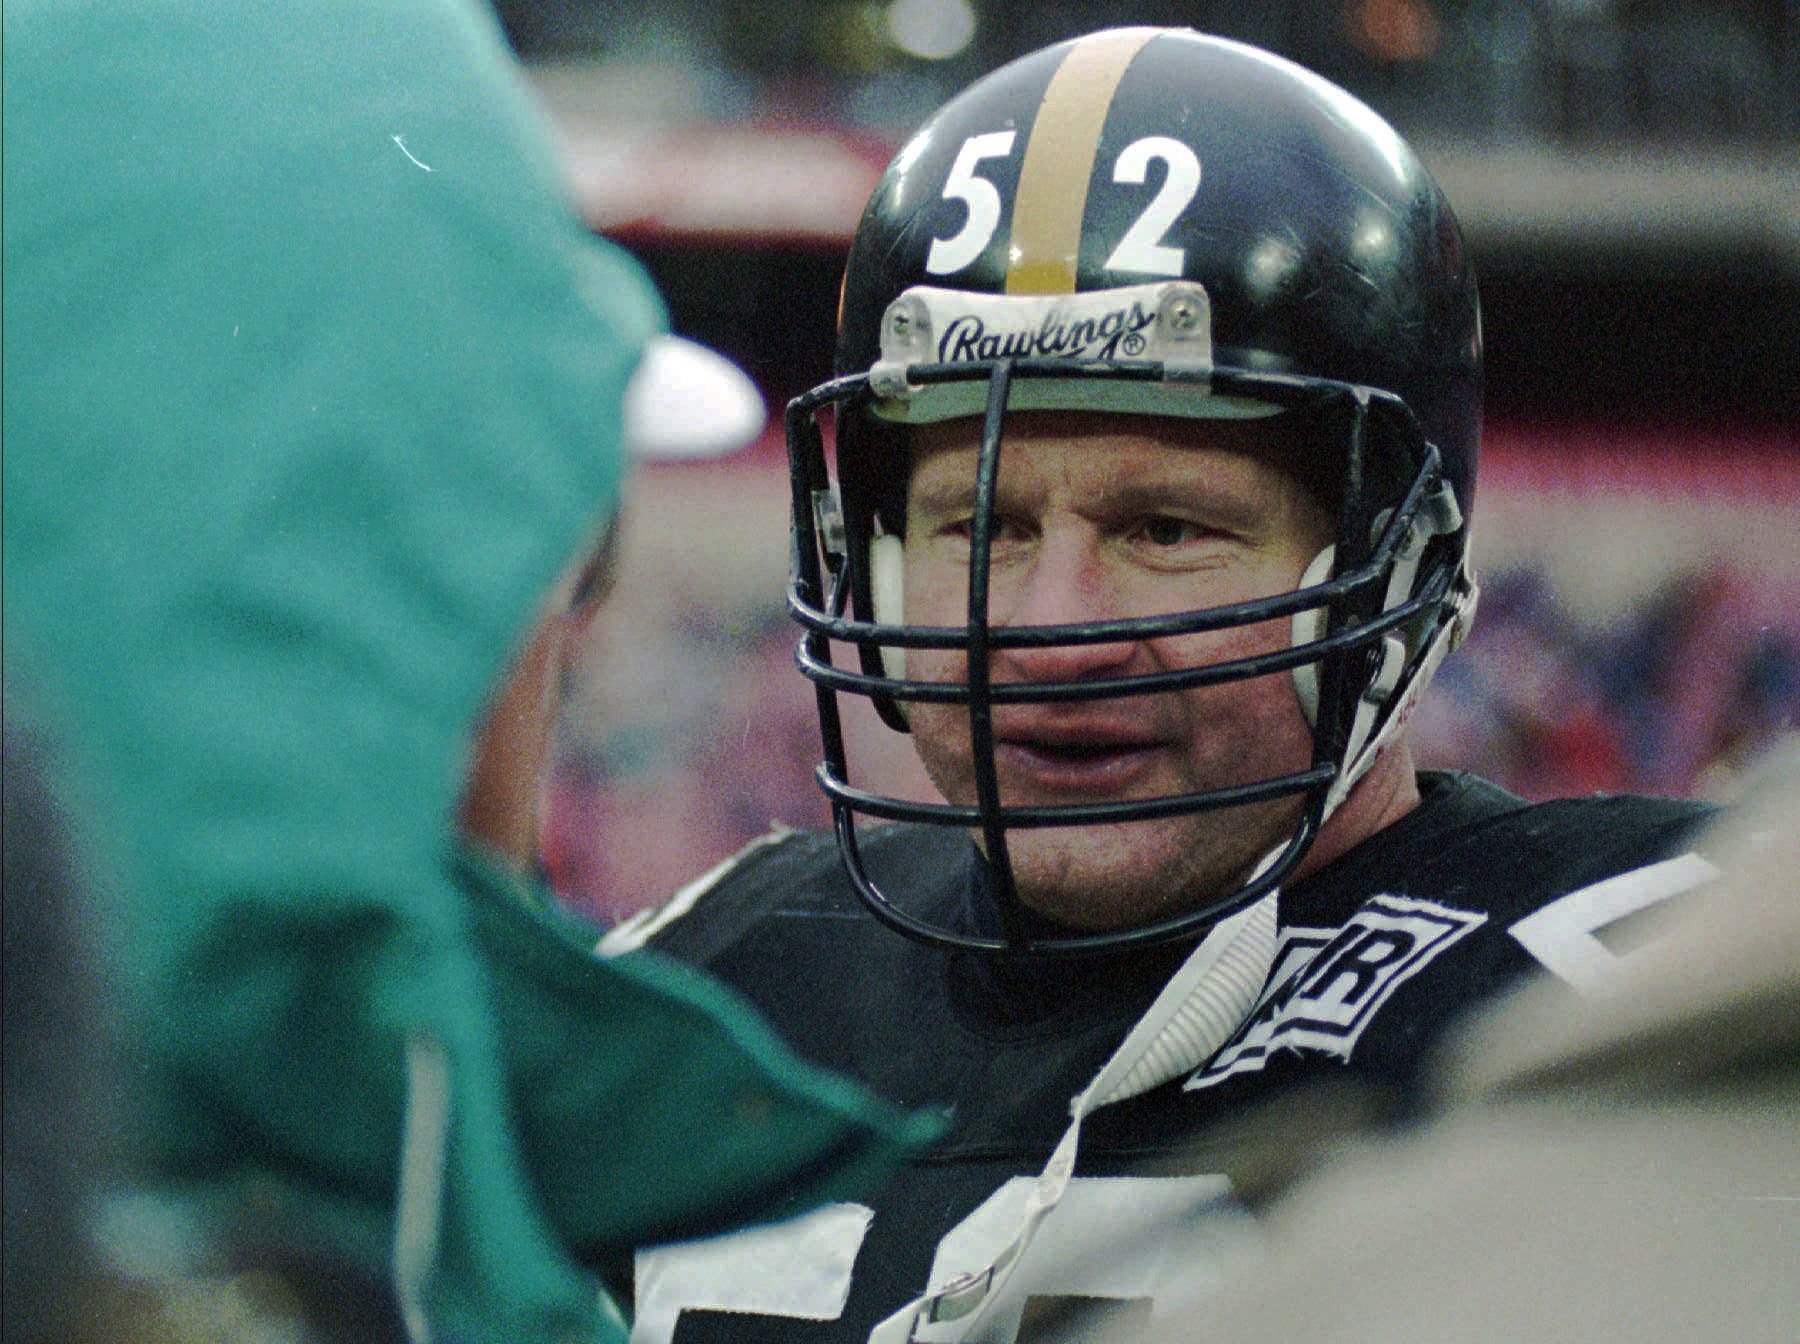 Pittsburgh Steelers Hall of Fame center Mike Webster, who died in 2002, became the first known case of chronic traumatic encephalopathy, or CTE, when Dr. Bennet Omalu found traces of toxic tau proteins in his brain. The NFL has not acknowledged any connection between football concussions and CTE.